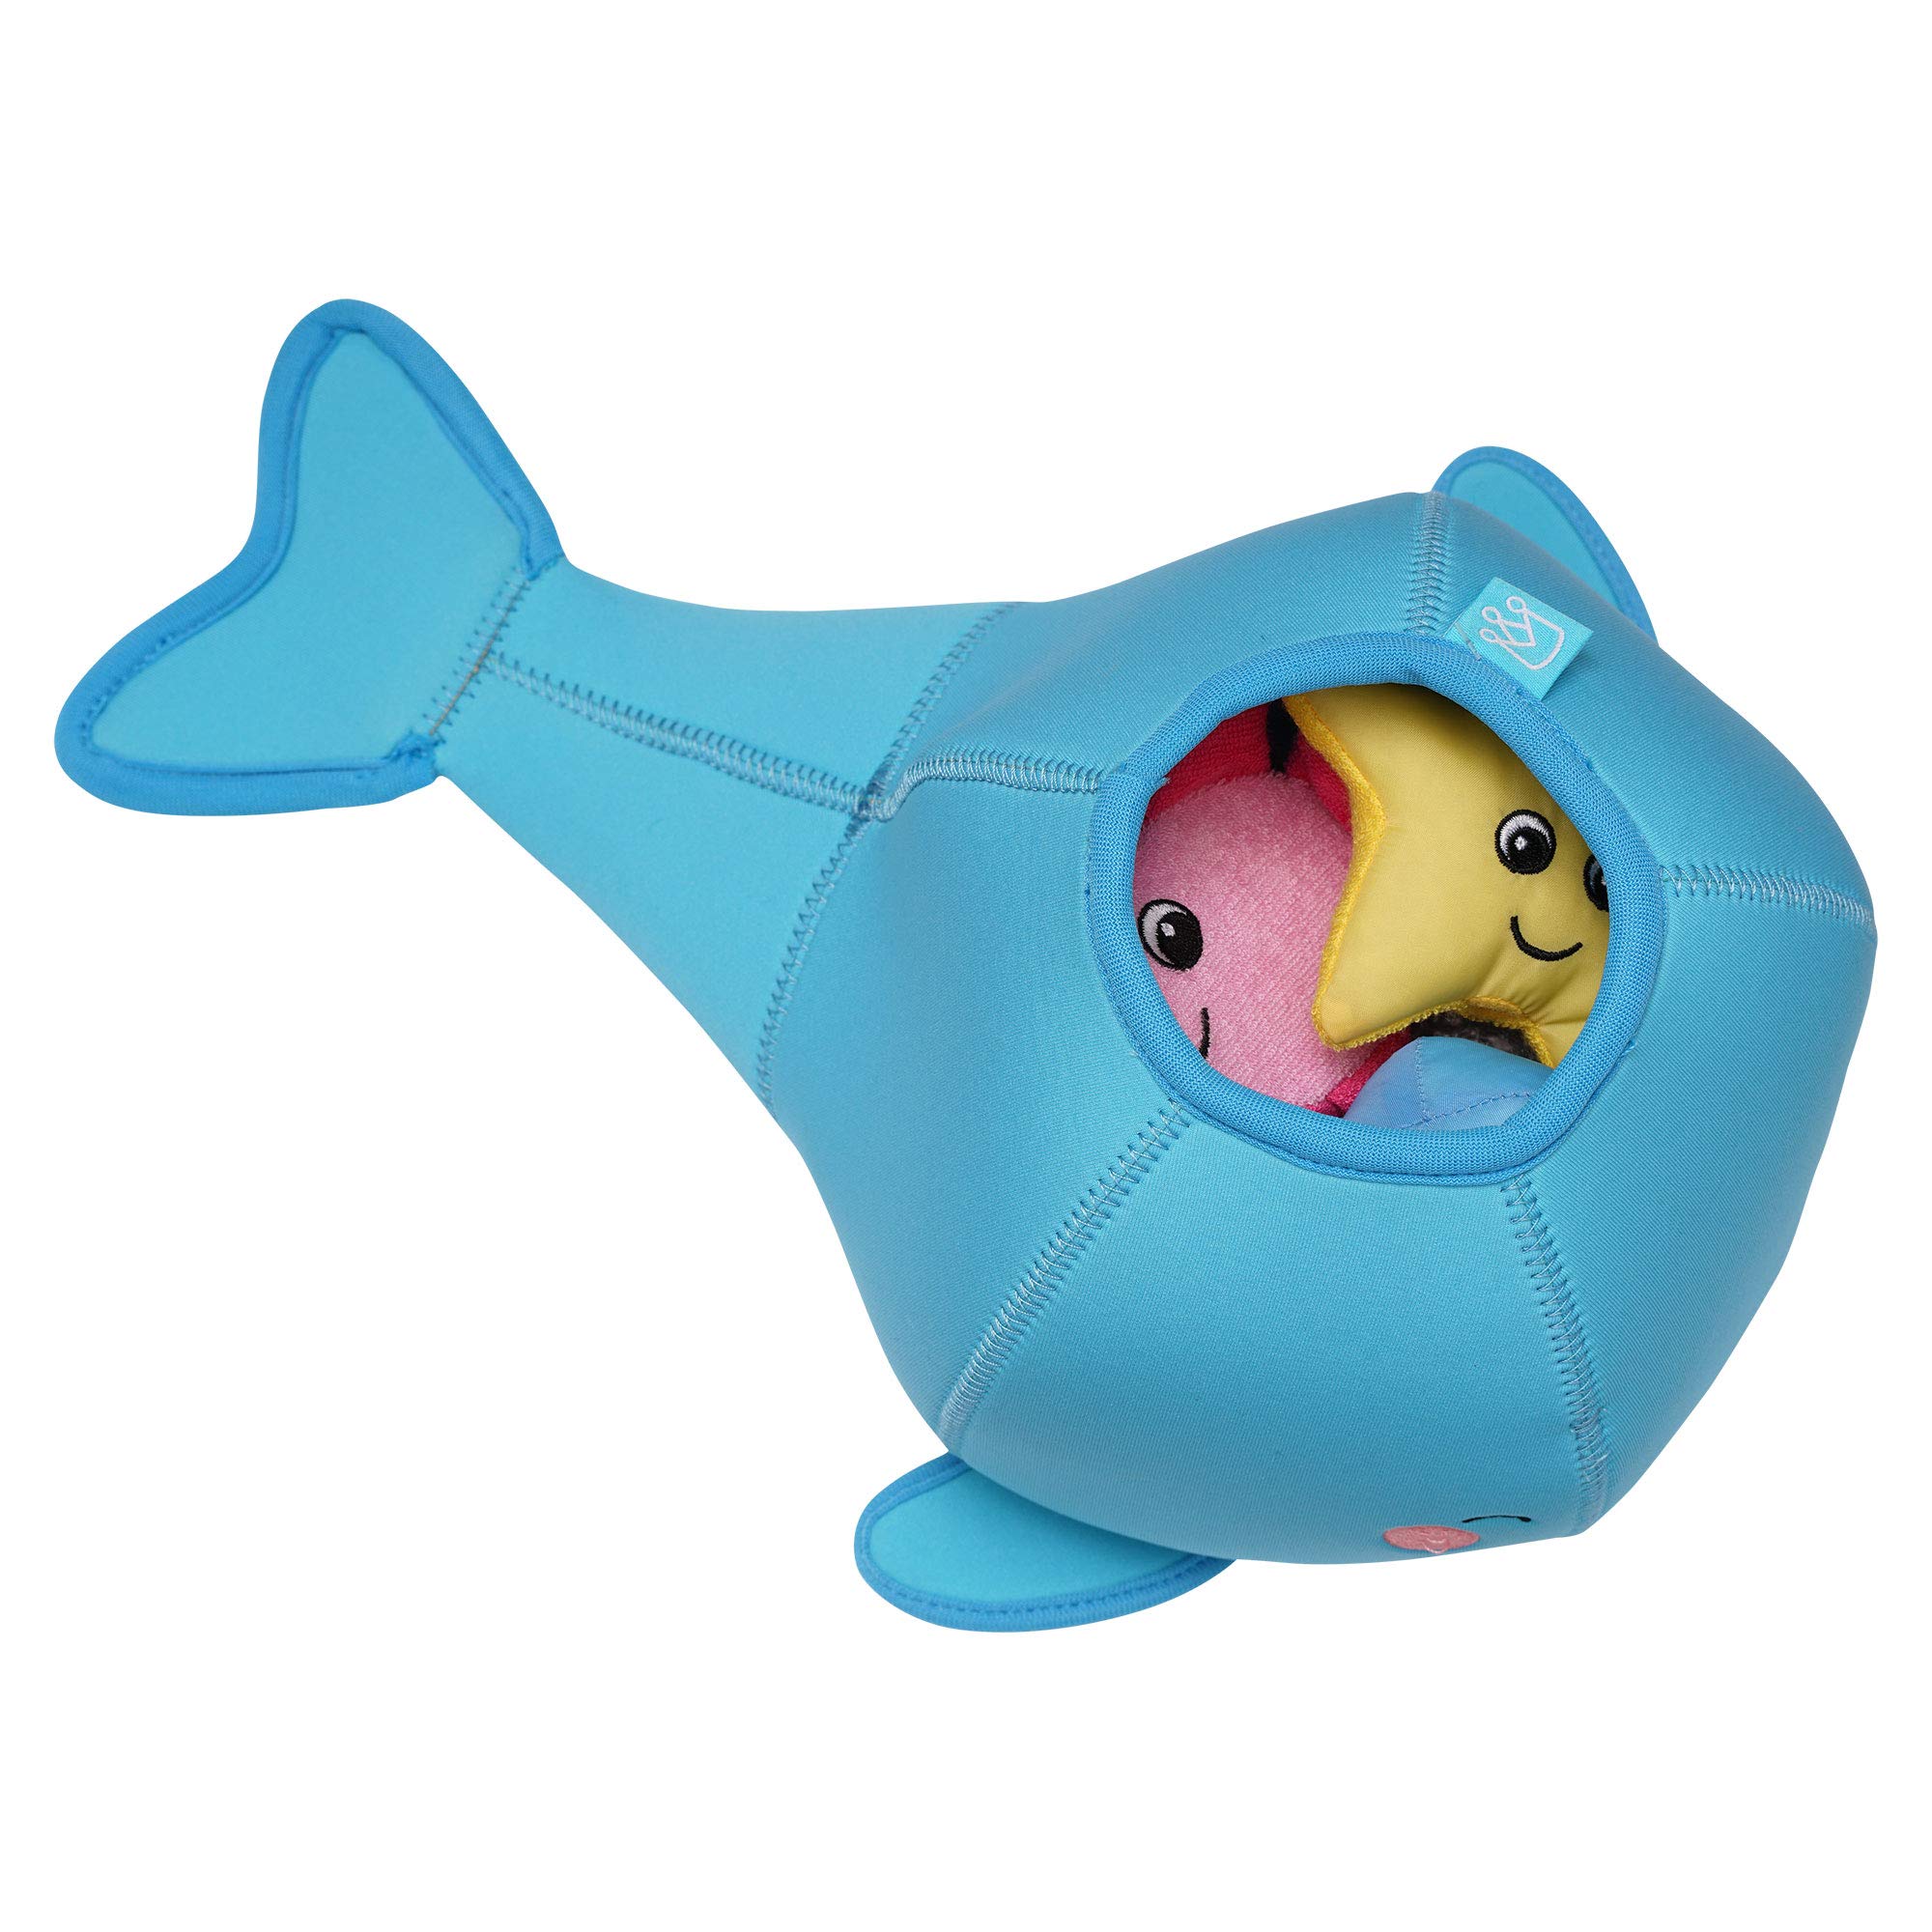 Manhattan Toy Neoprene Whale 5-Piece Floating Spill n Fill Bath Toy with Quick Dry Sponges and Squirt Toy